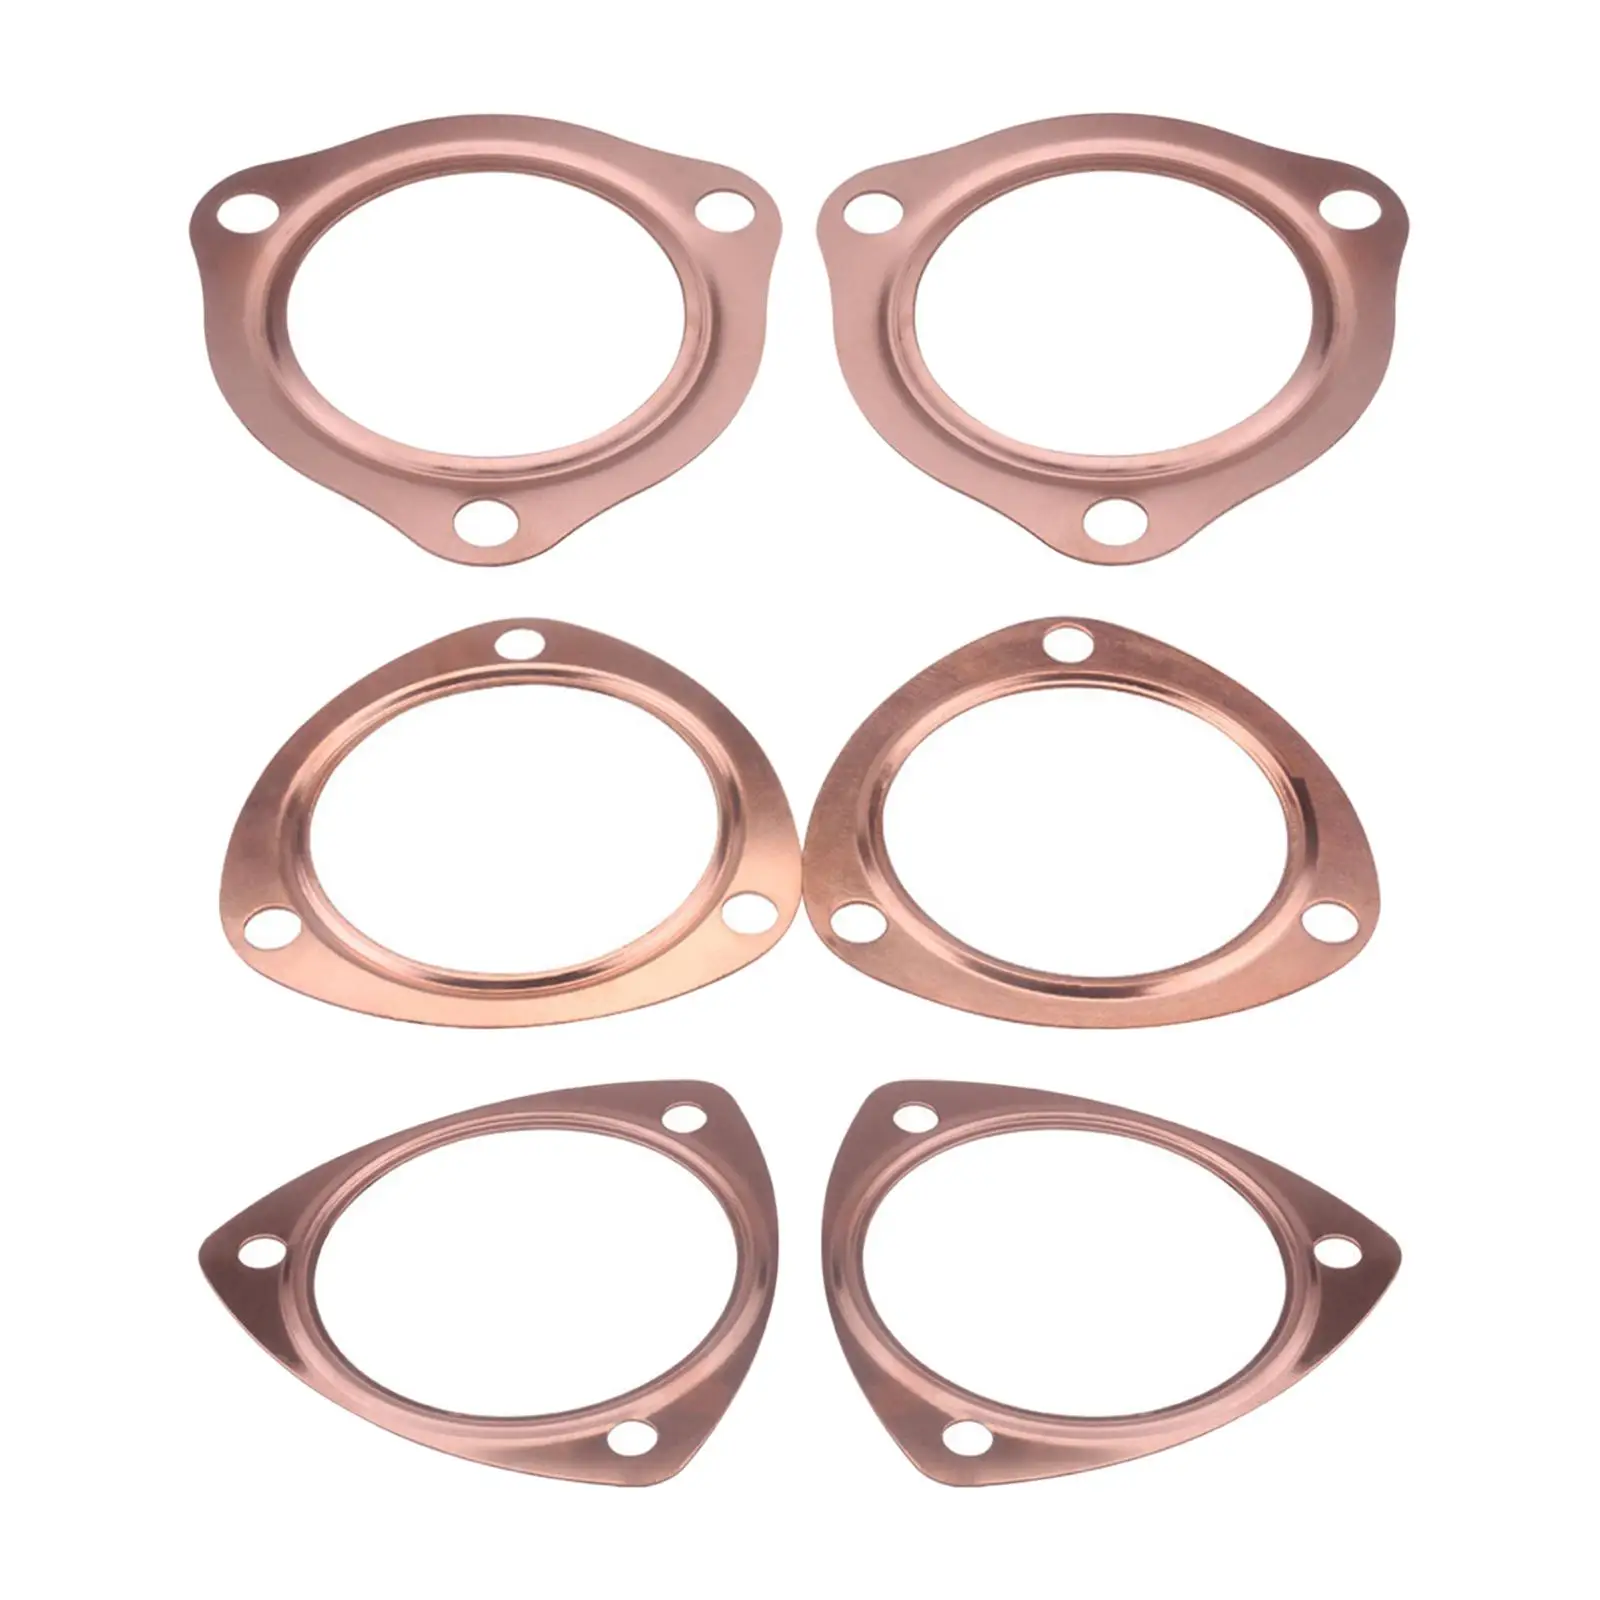 Copper Collector Gasket Copper Header Exhaust Collector Gaskets for Sbc  302 350 454